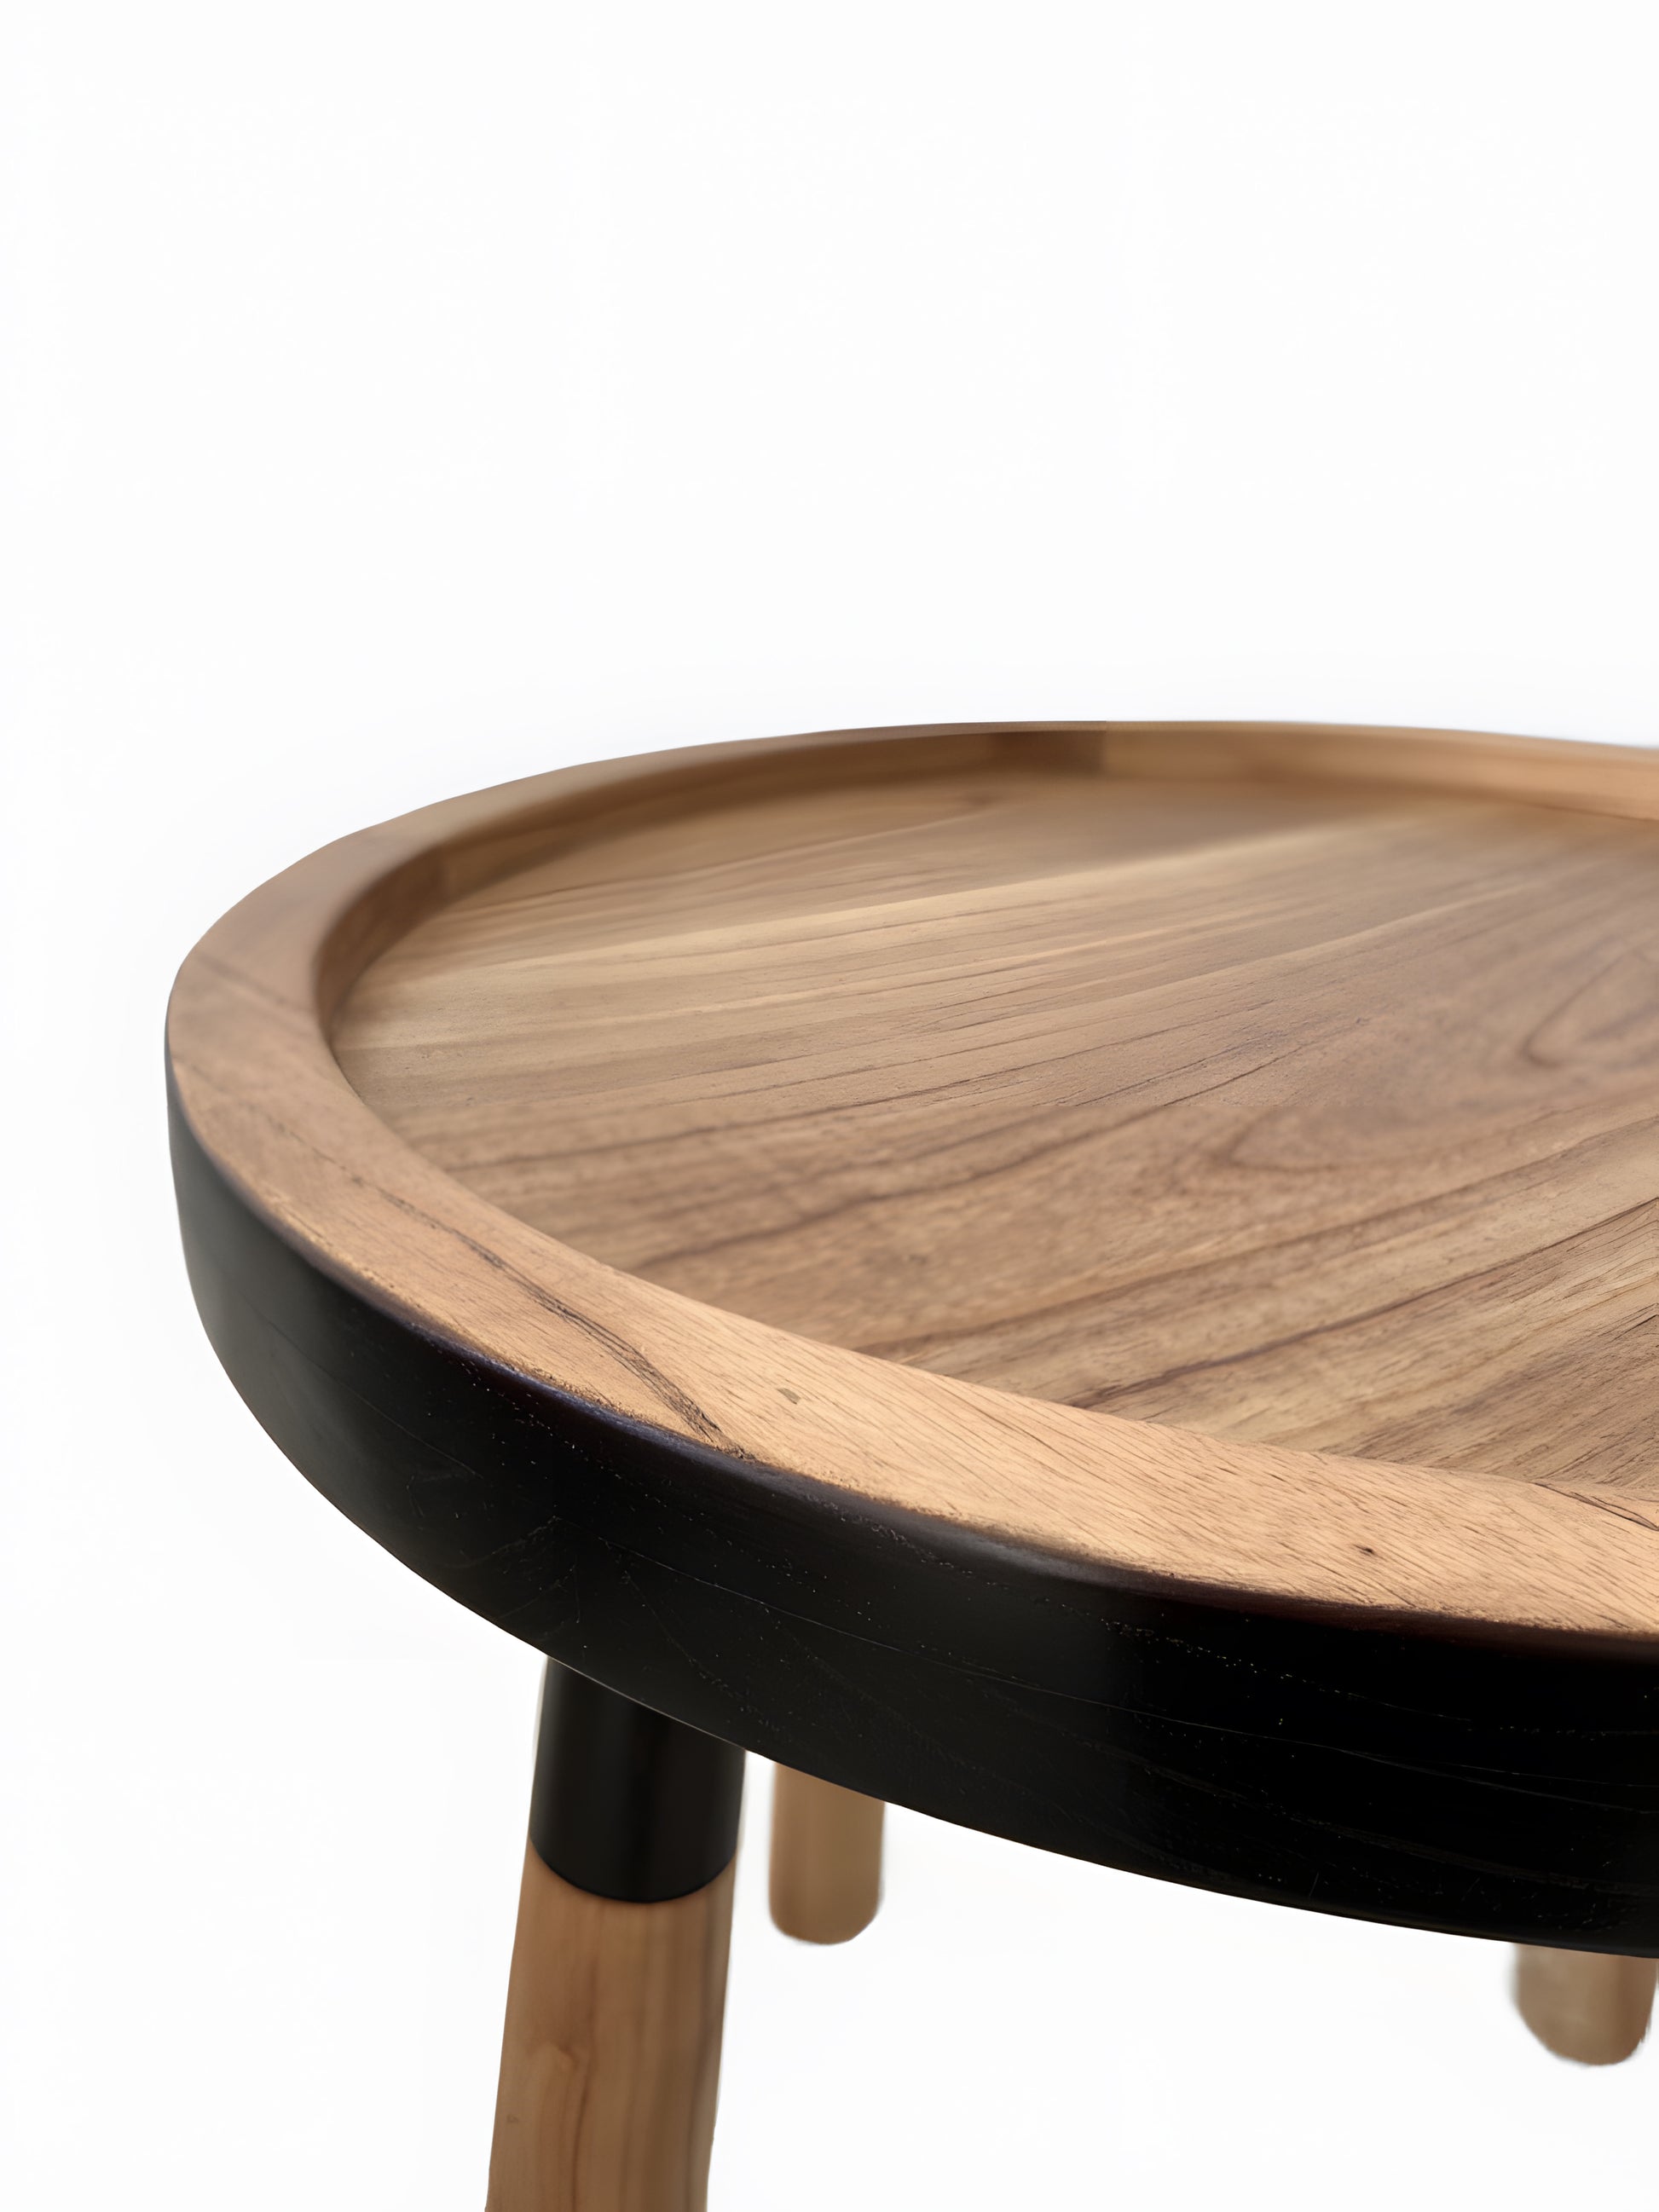 Tomasa Teakwood Tray Top Round Coffee Table detail view by Mellowdays Furniture